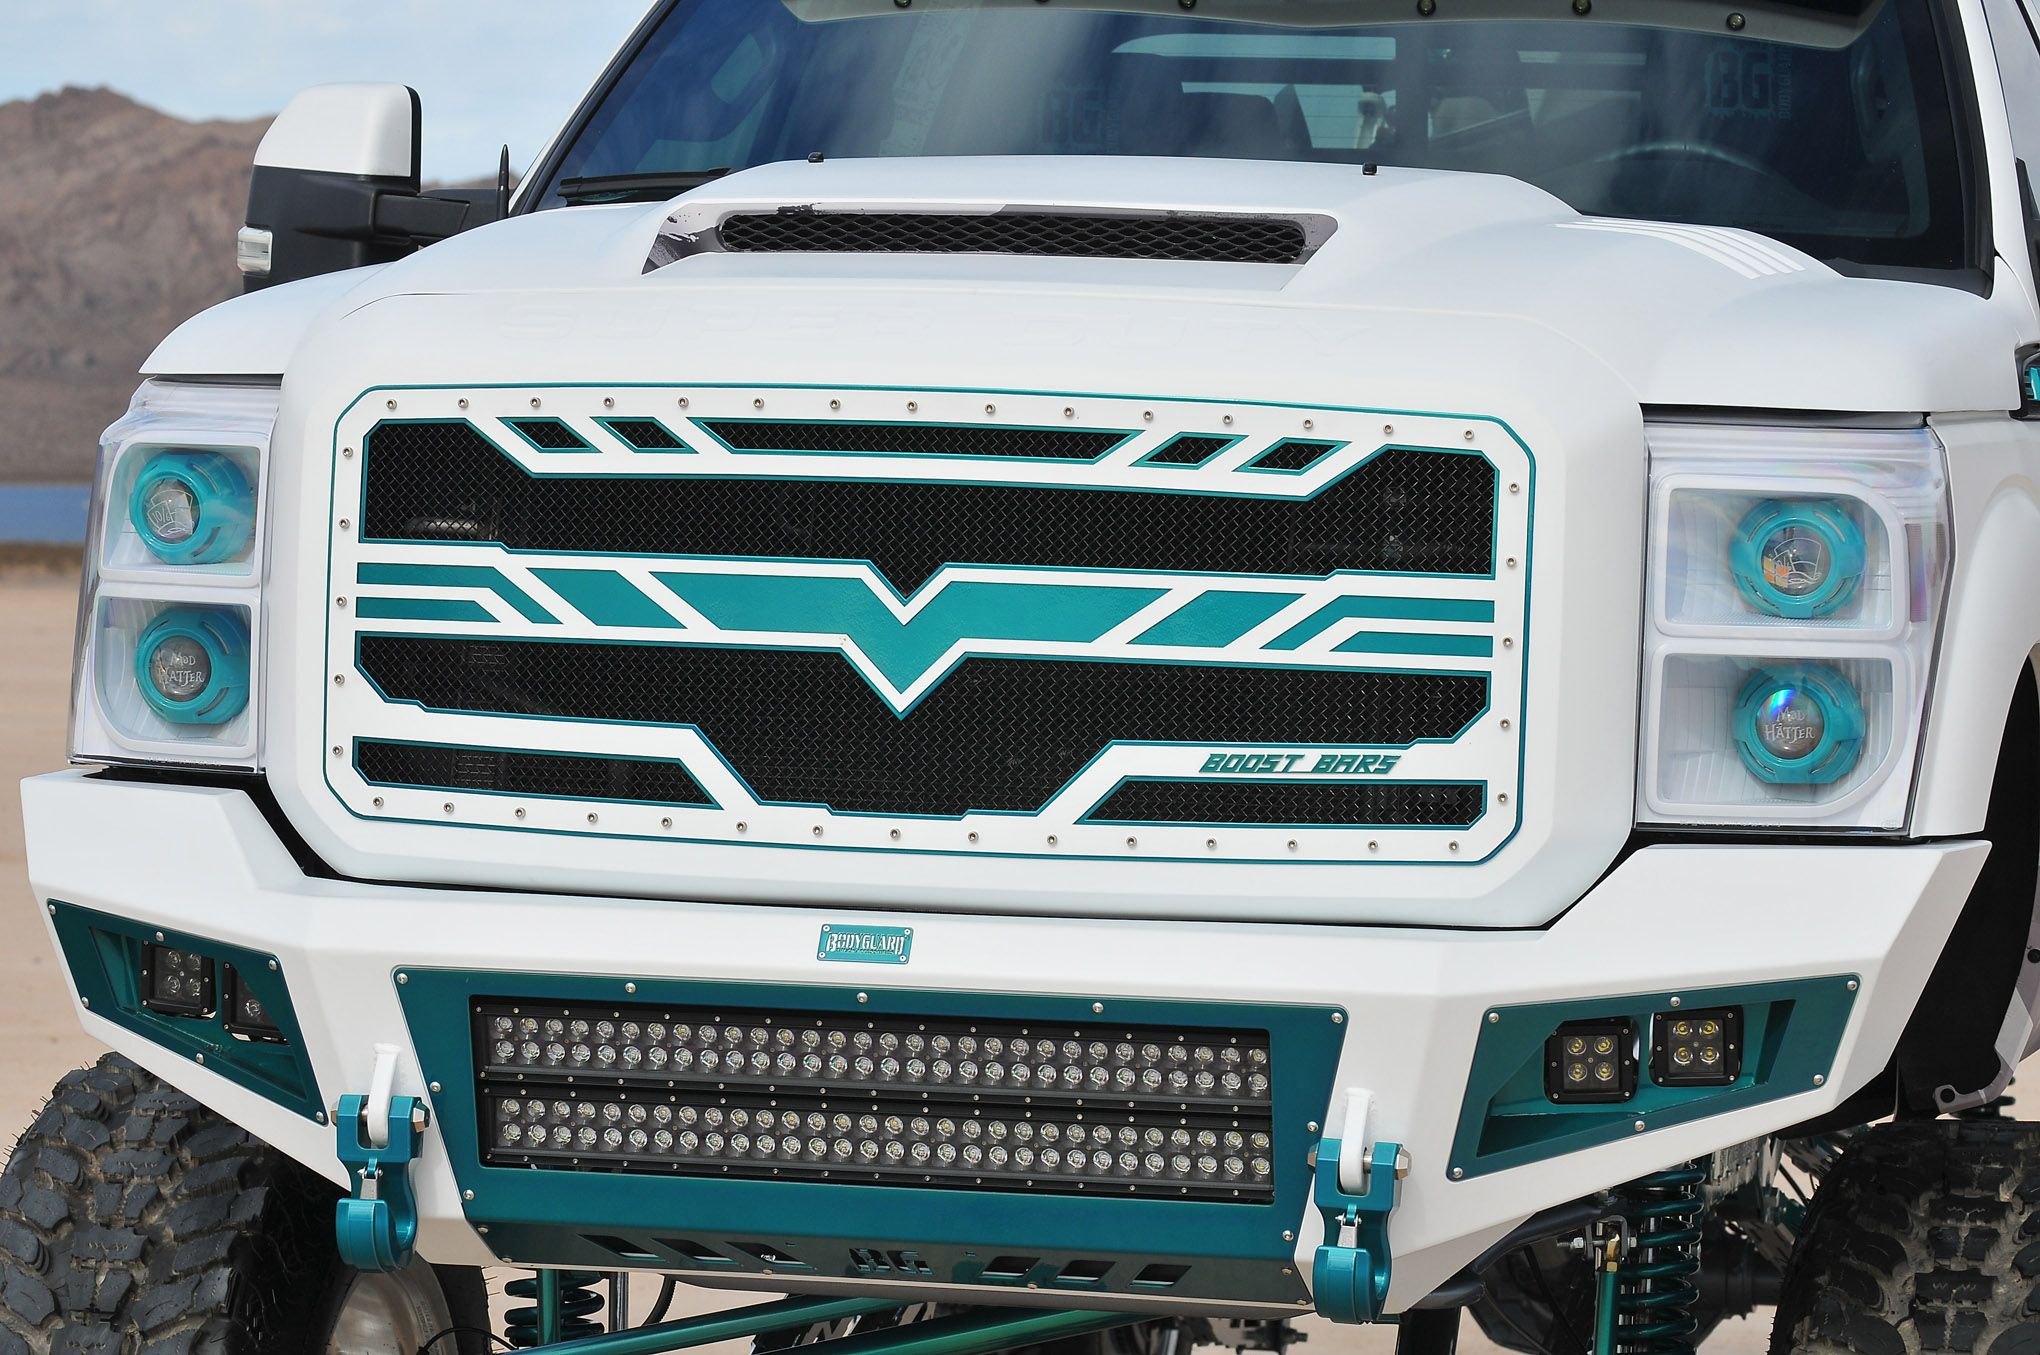 Custom Boost Bars Mesh Grille on White Lifted Ford F-350 - Photo by Phil Gordon